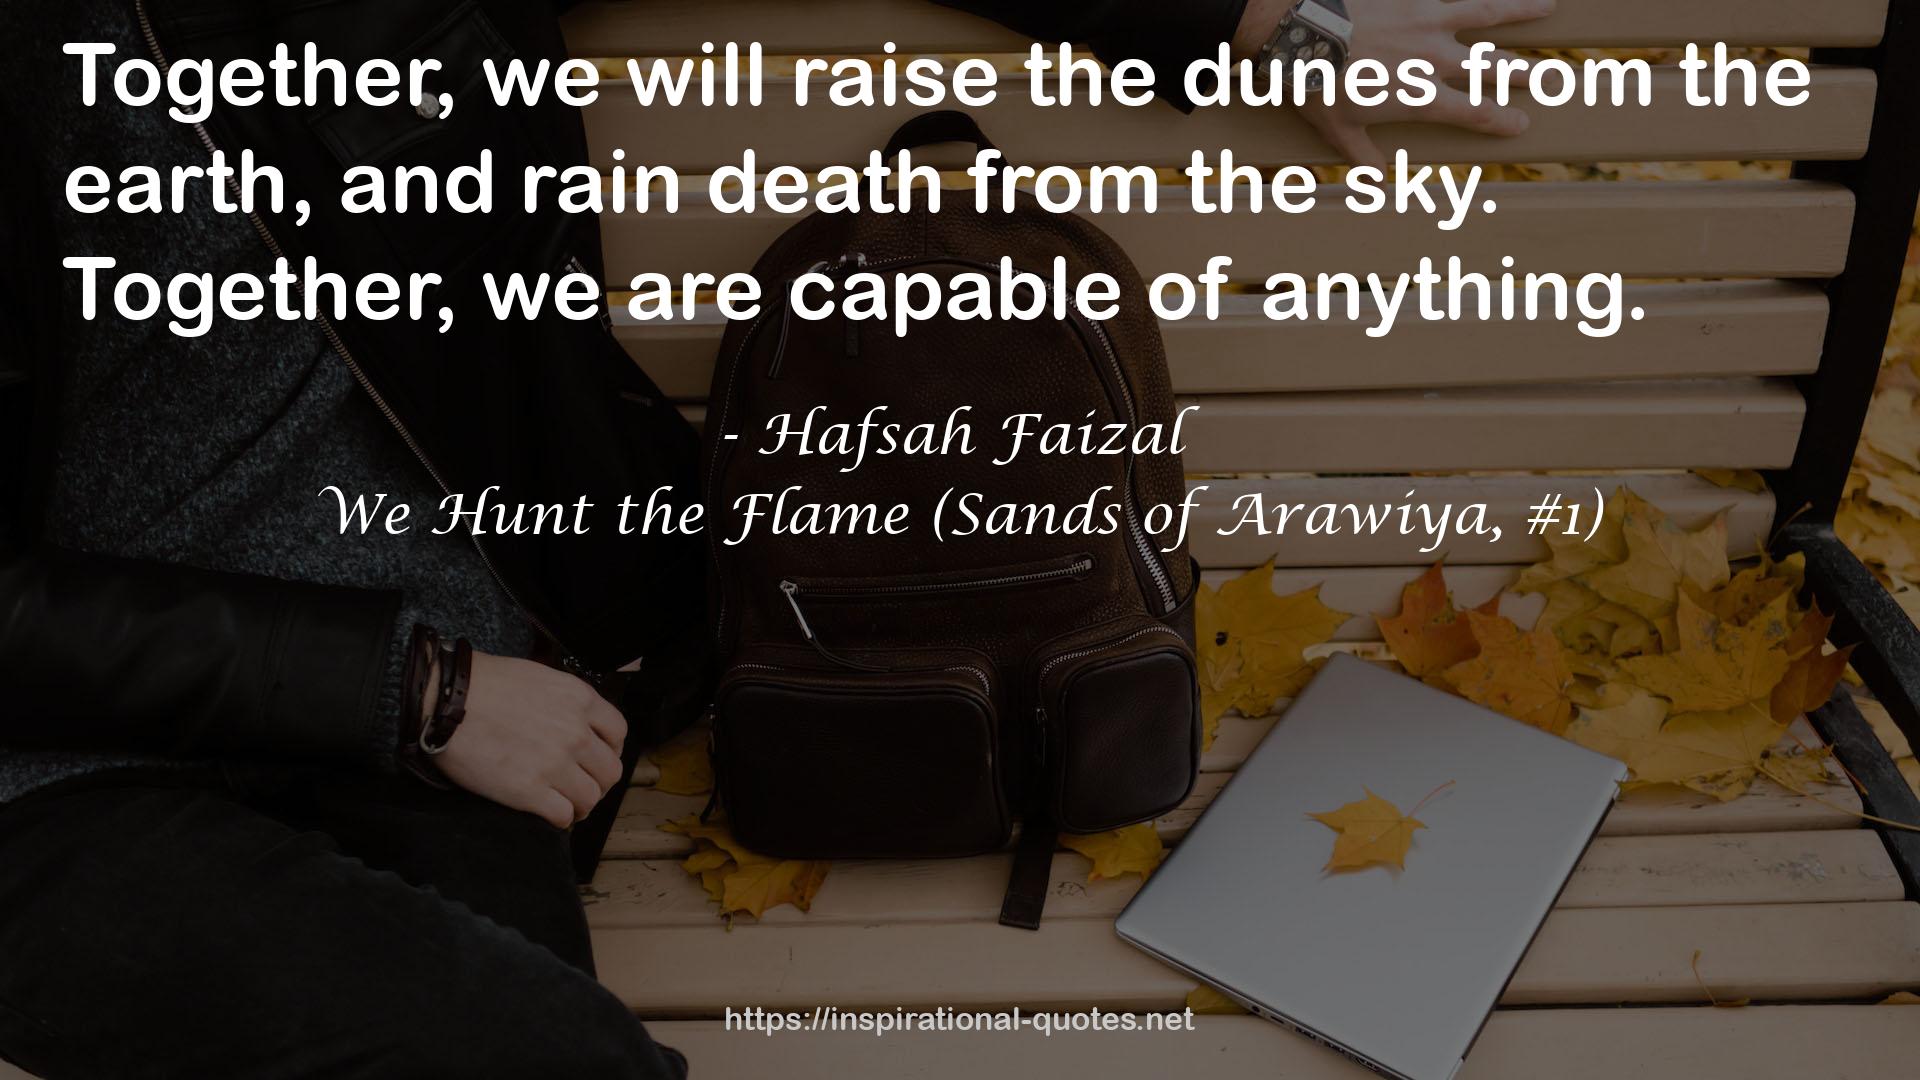 We Hunt the Flame (Sands of Arawiya, #1) QUOTES